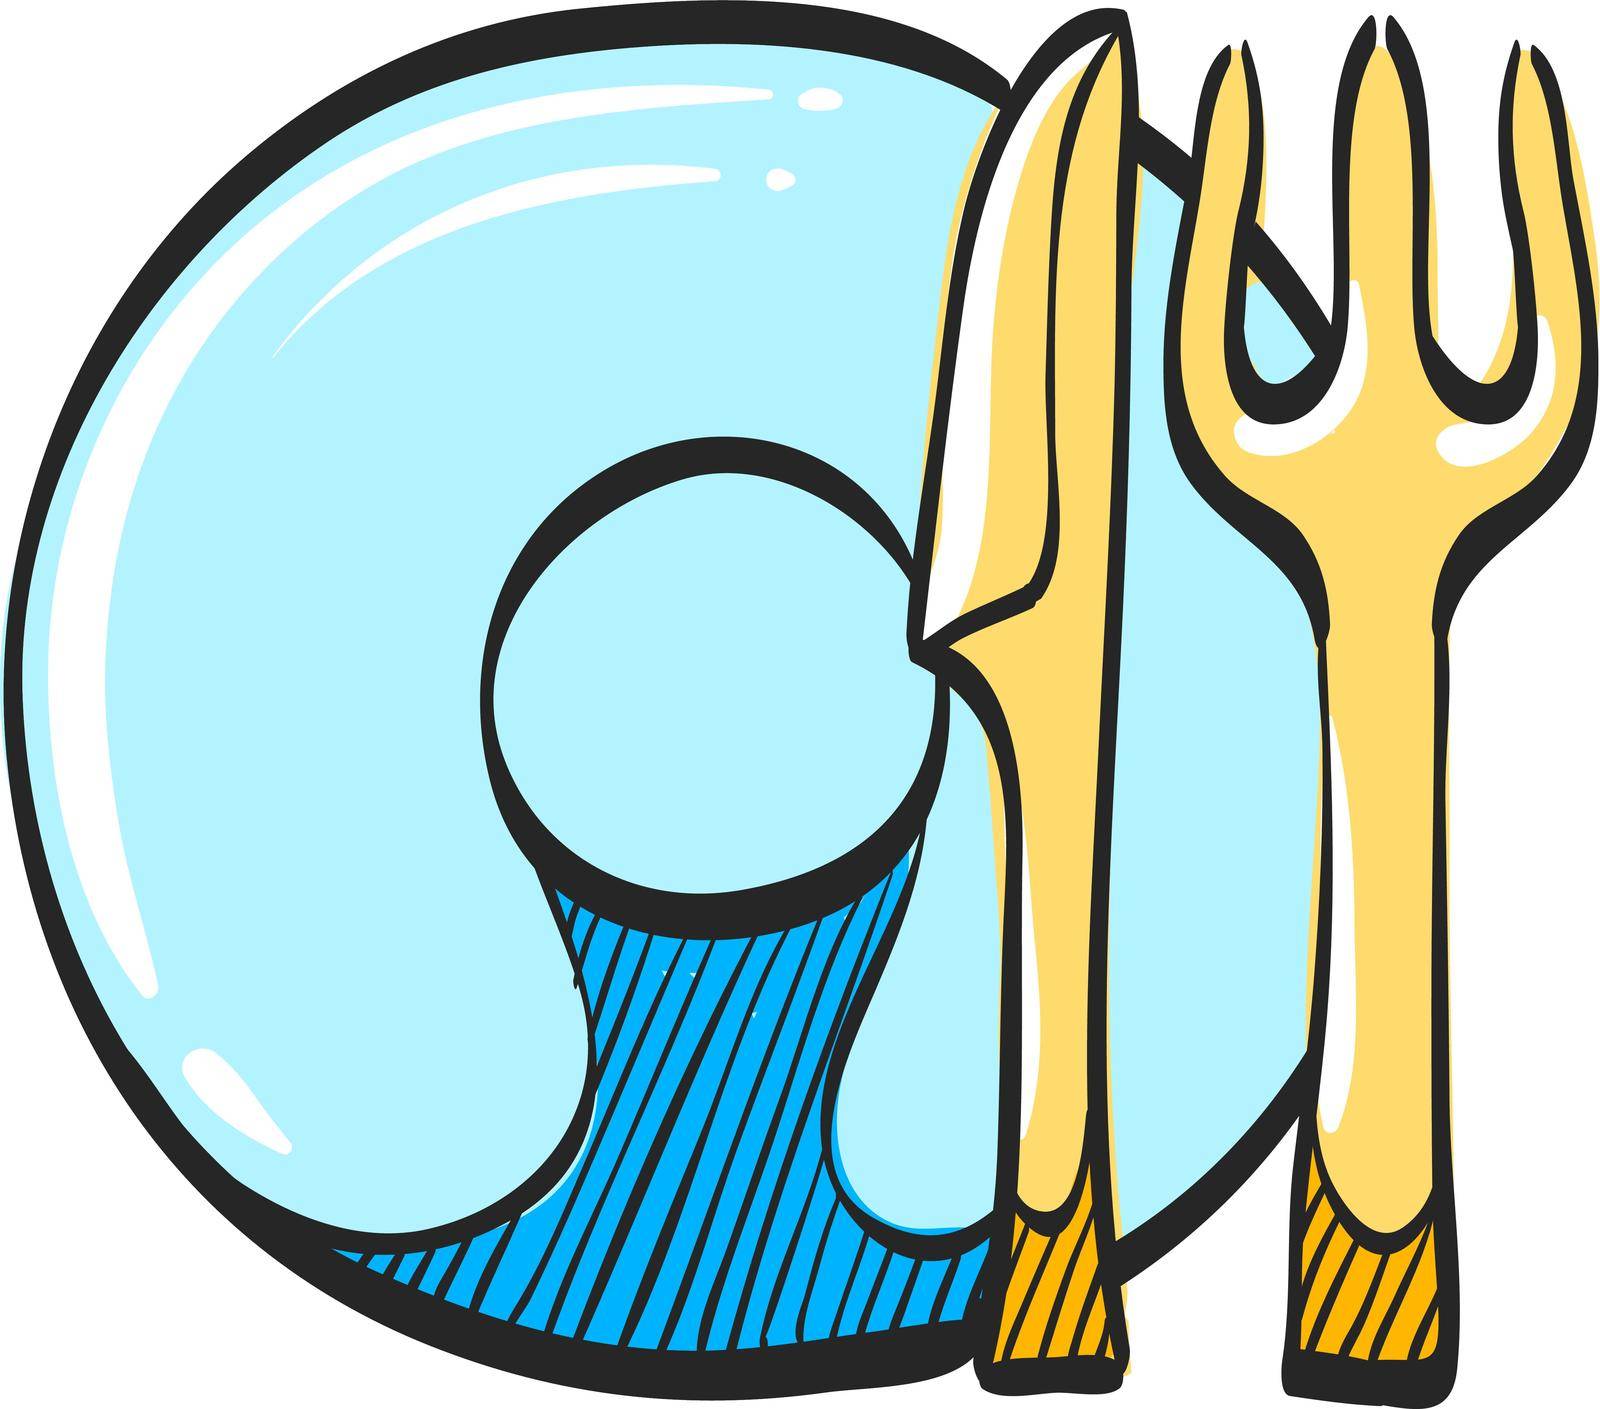 Dishes icon in color drawing. Spoon fork dinner supper breakfast eating by puruan